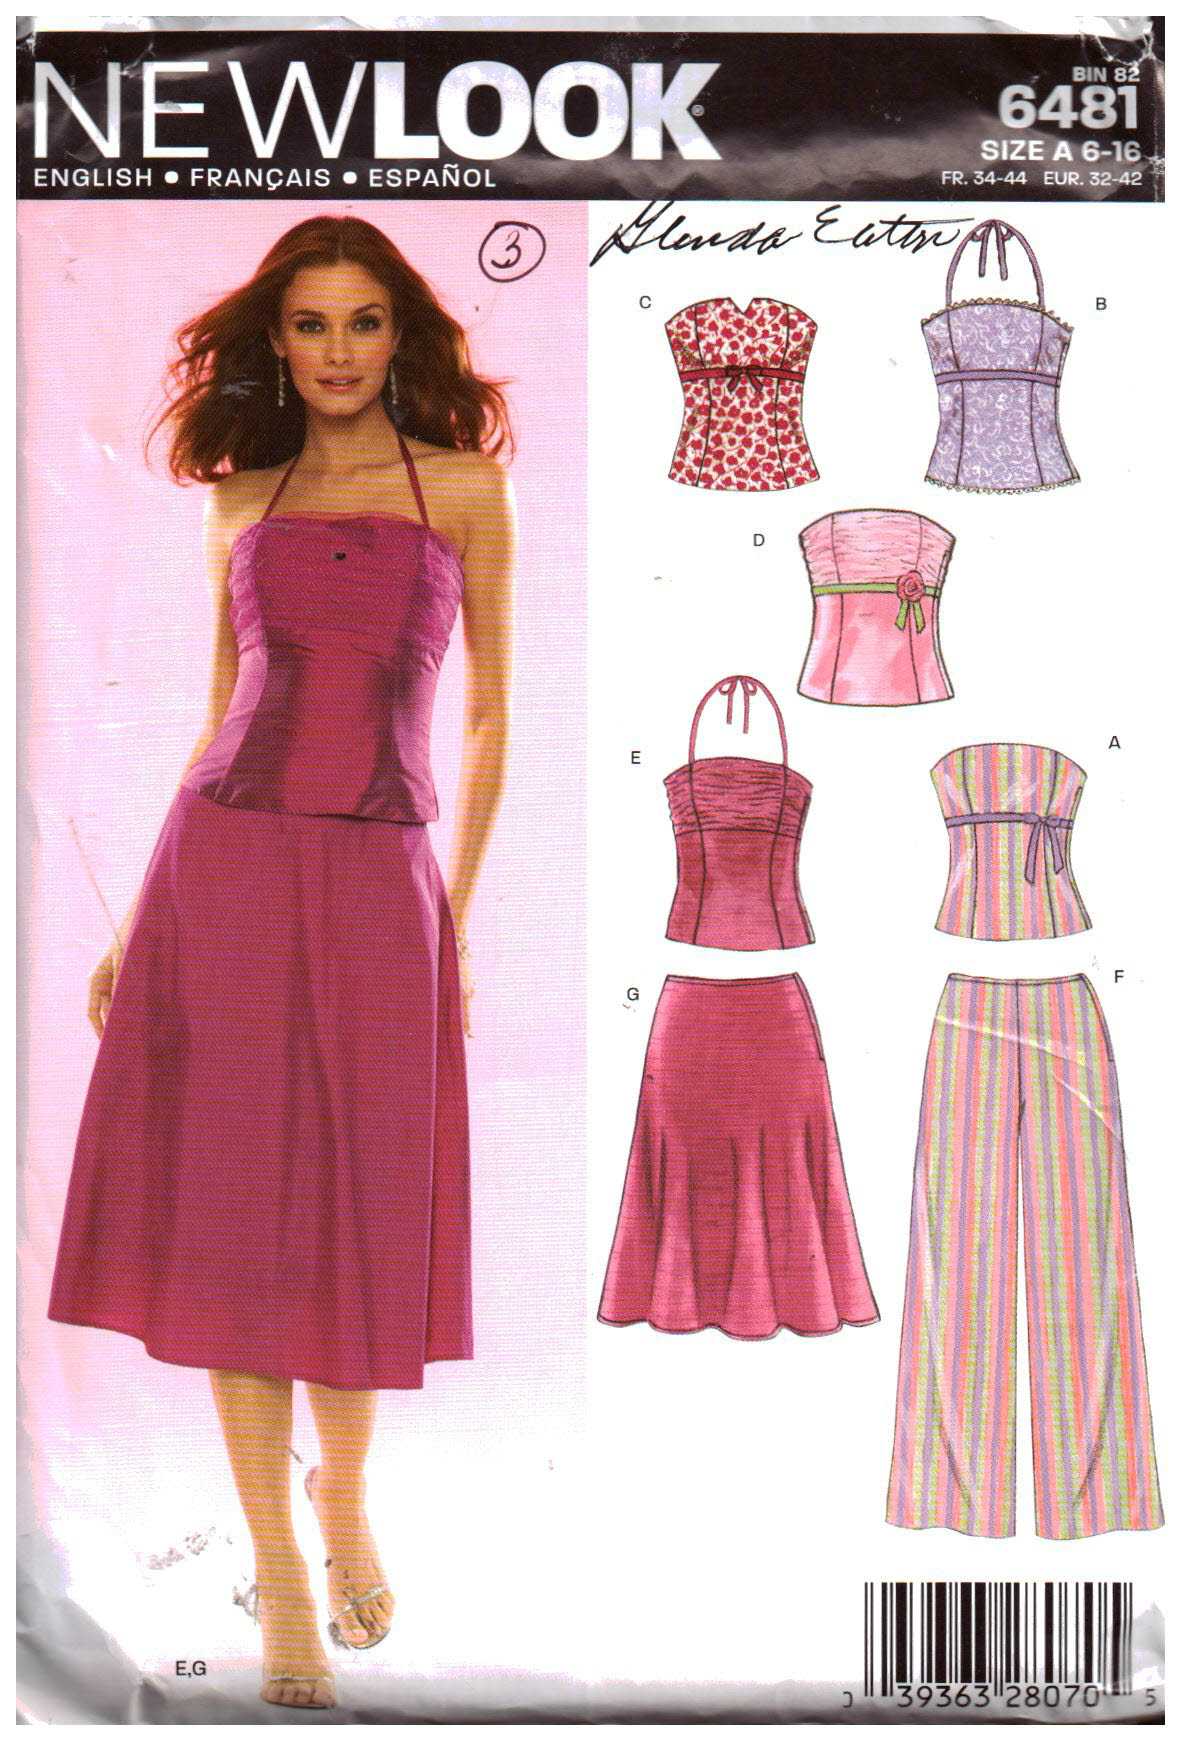 New Look 6481 Pants, Skirt, Tops Size: A 6-16 Uncut Sewing Pattern